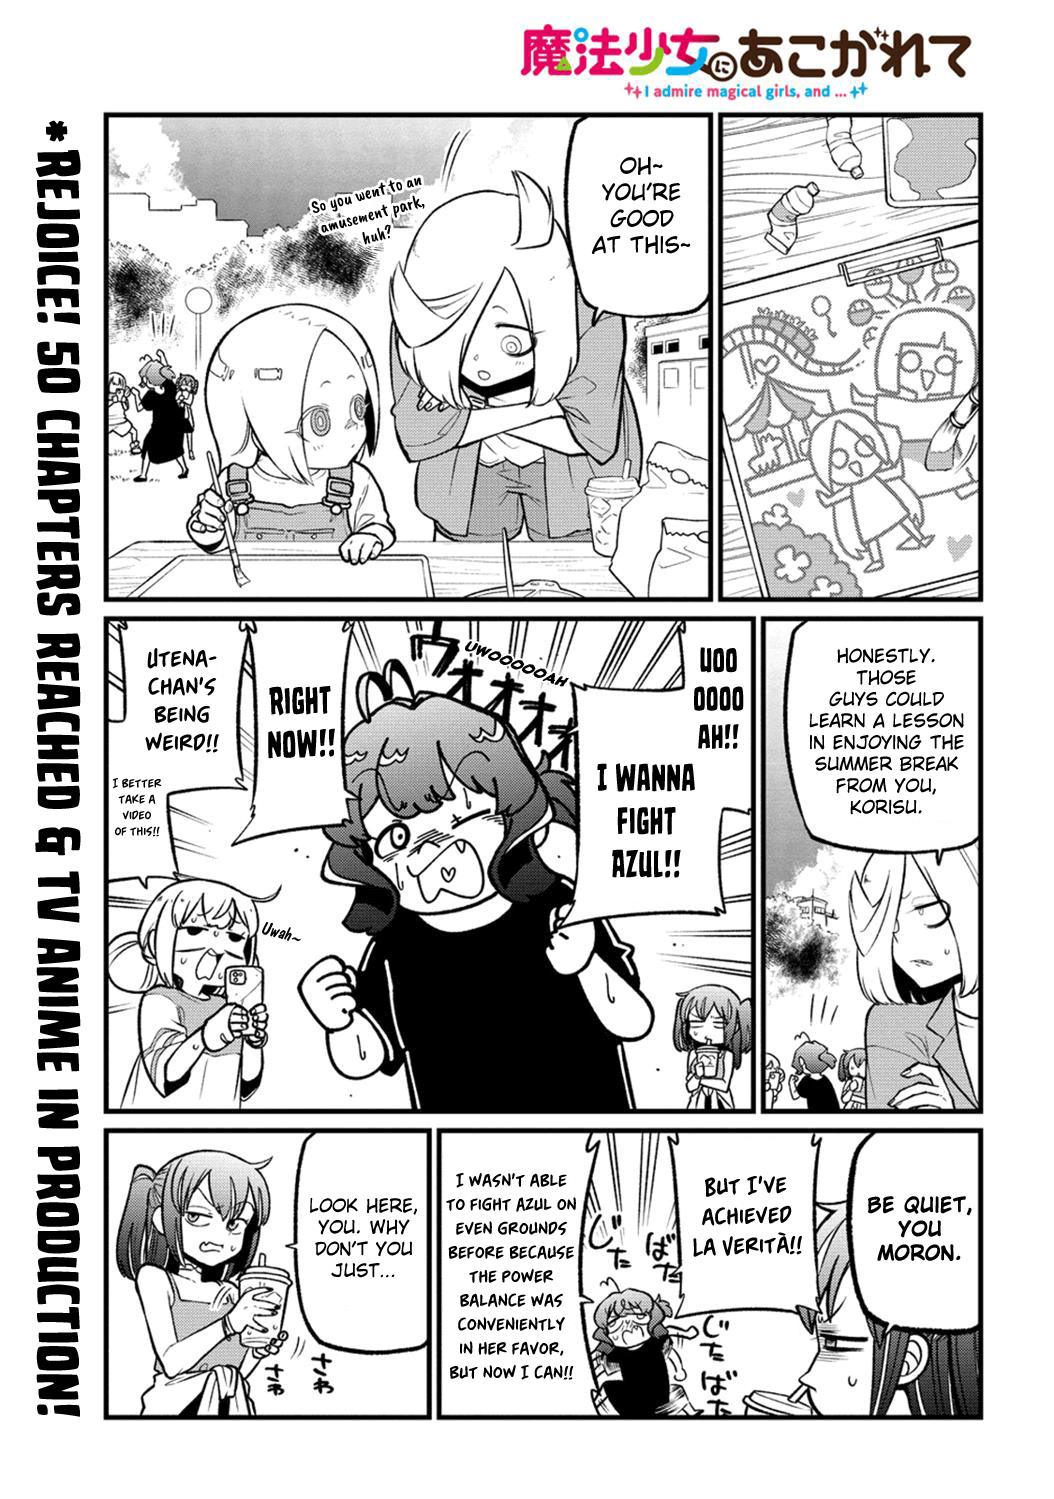 Looking Up To Magical Girls - Page 1